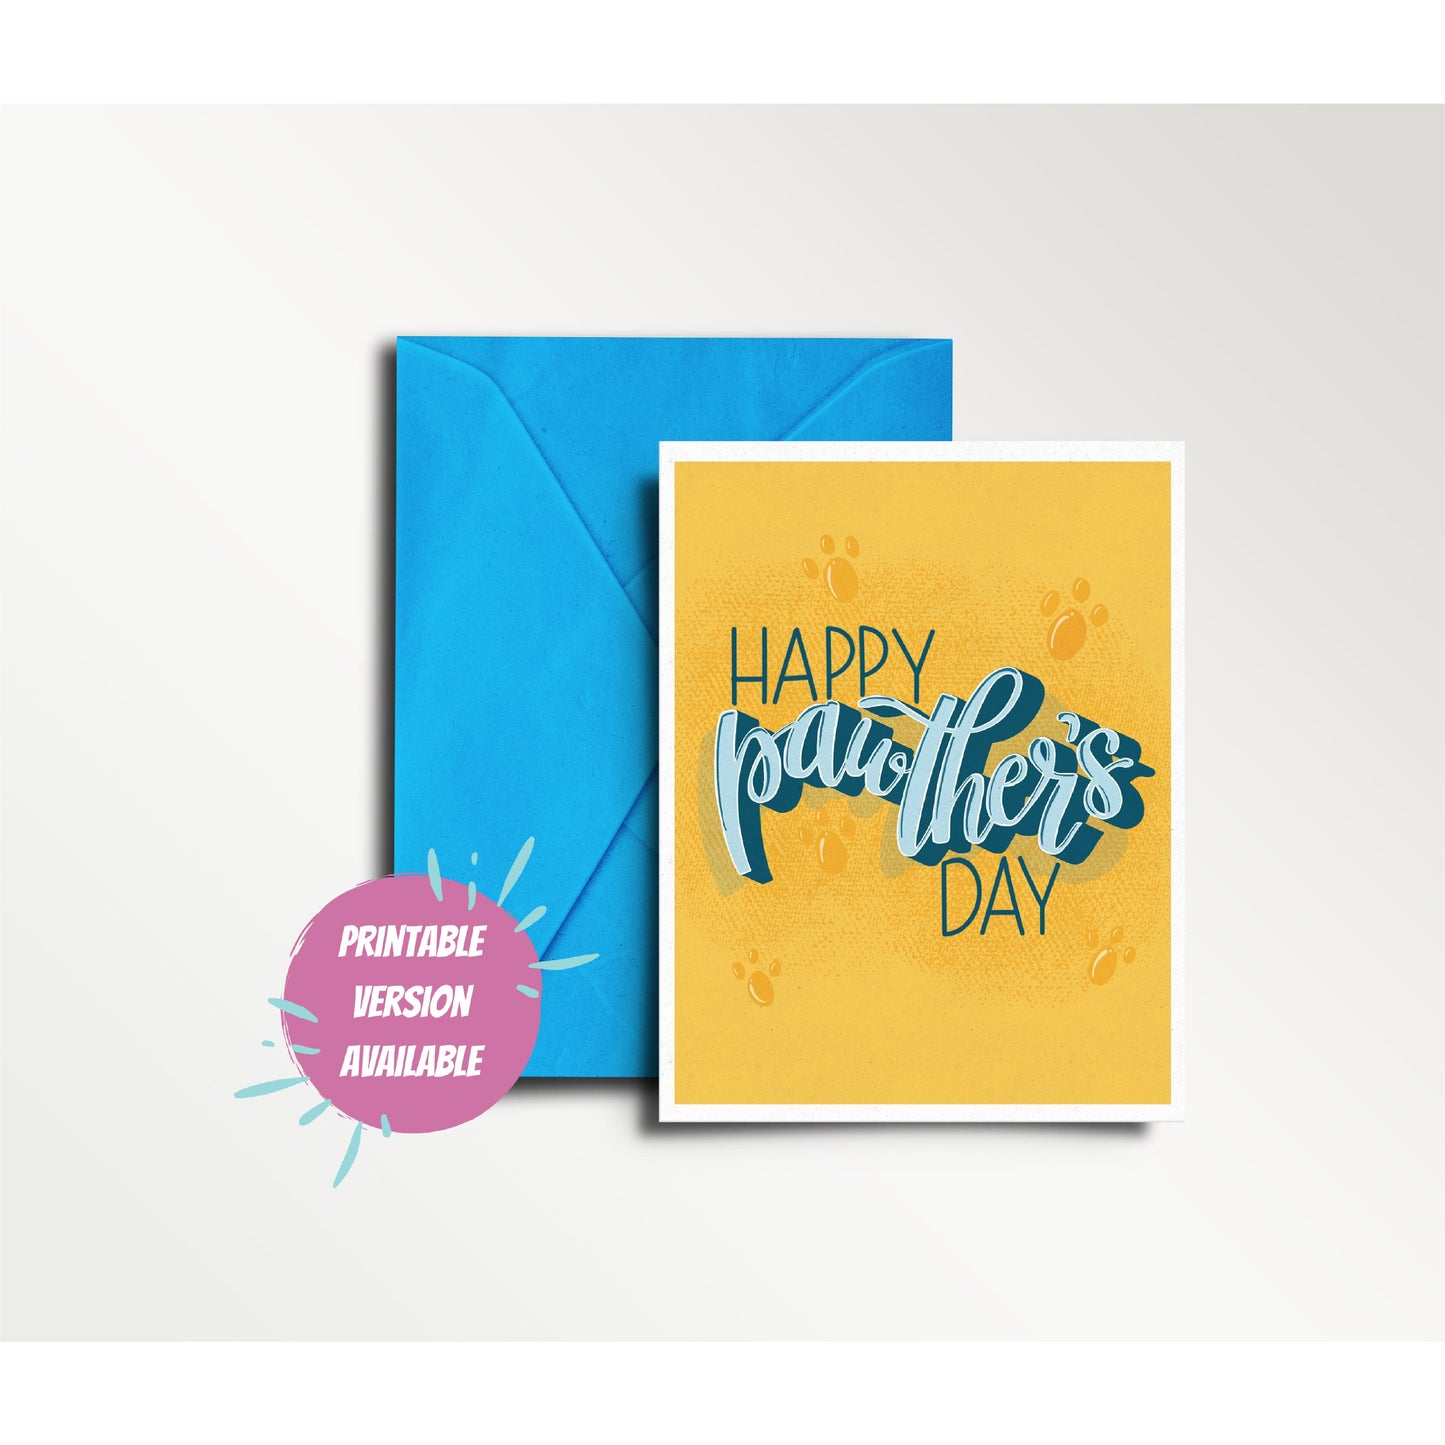 Happy Pawther's Day Card for Dog Dads and Cat Dads - Pet Lover Father's Day Printable Greeting Card